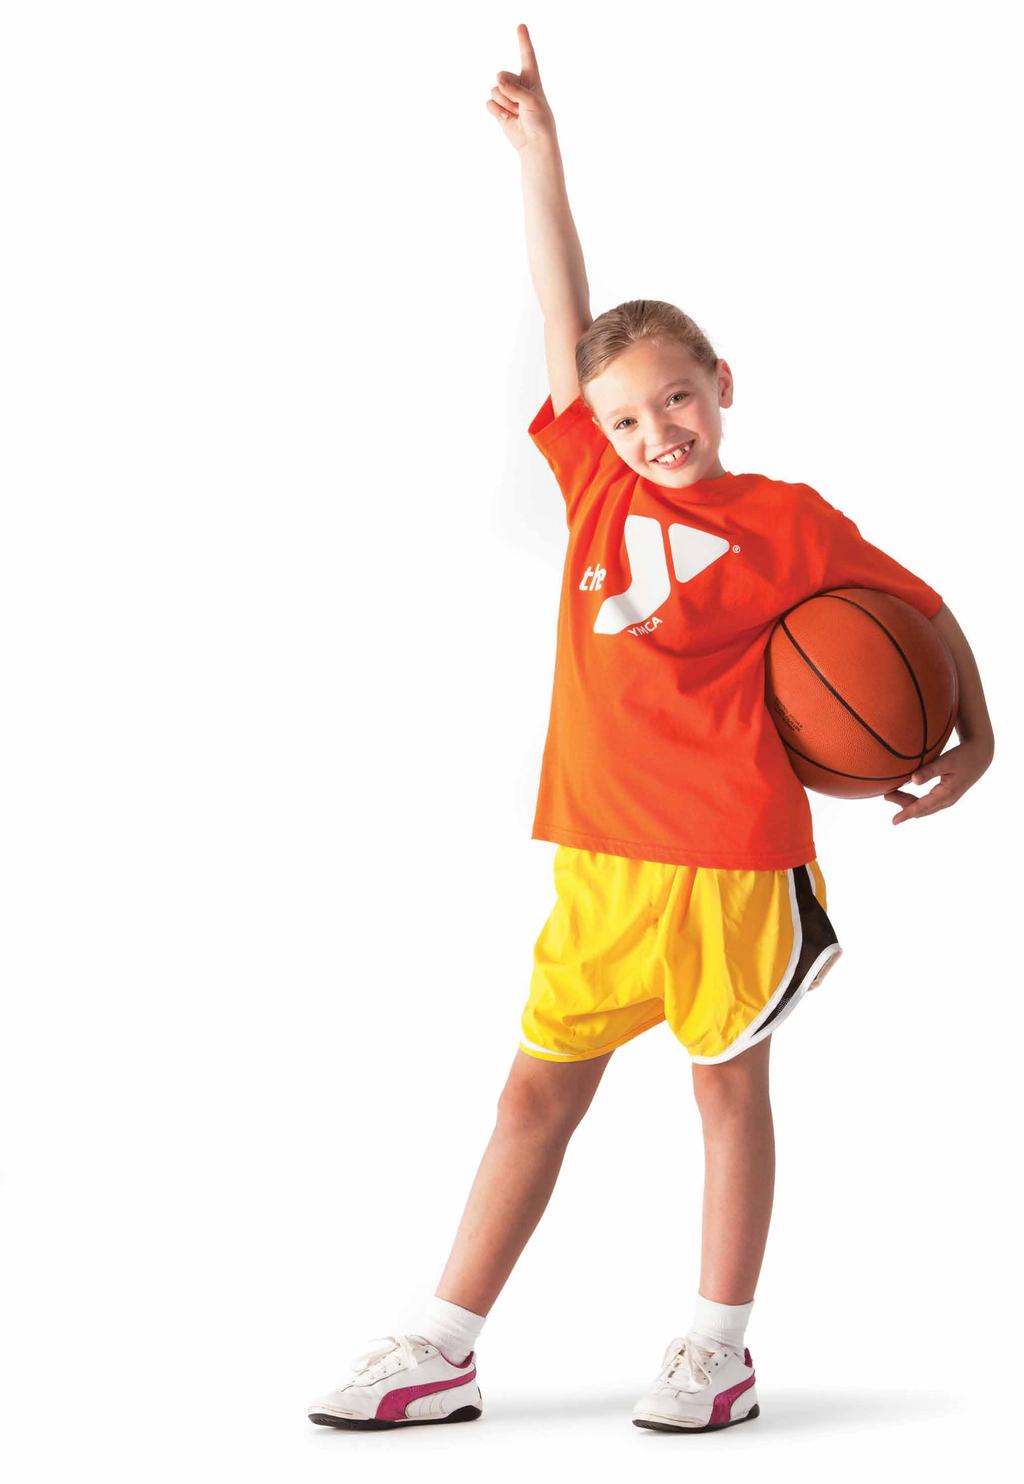 IT S More than a Game Preschool & Youth Sports The benefits of playing sports go far beyond the physical.